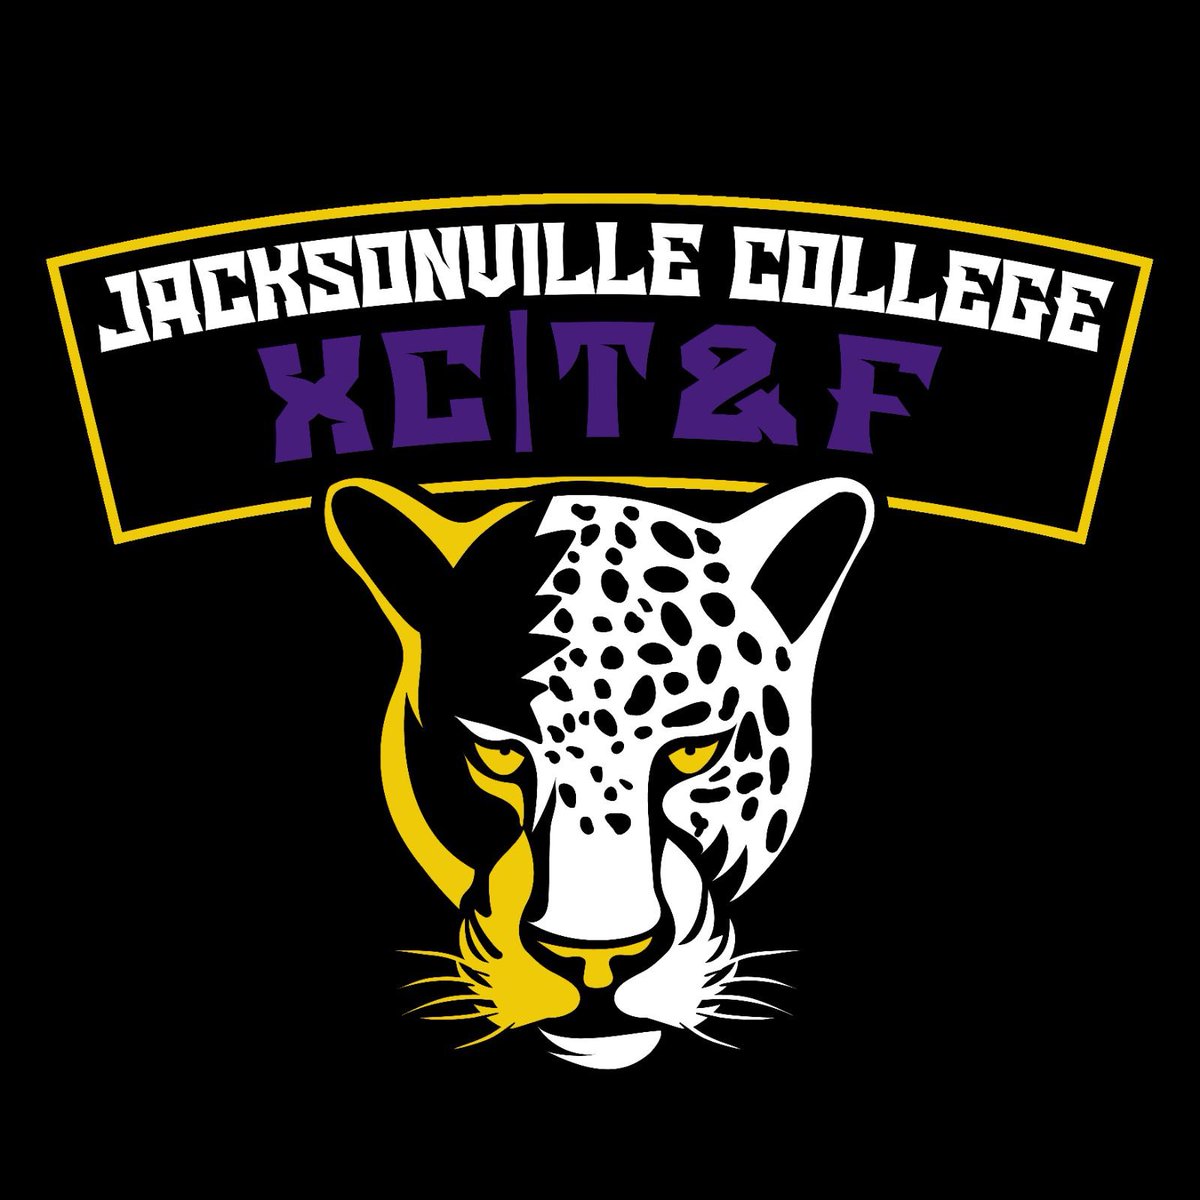 After a great talk with Coach Rowland, I am blessed and grateful to have received my 4th official offer to continue my athletic and academic career at Jacksonville College @jvillecollegeXC #AGTG✝️ #BLESSED @BelairTrack @DavisKl15